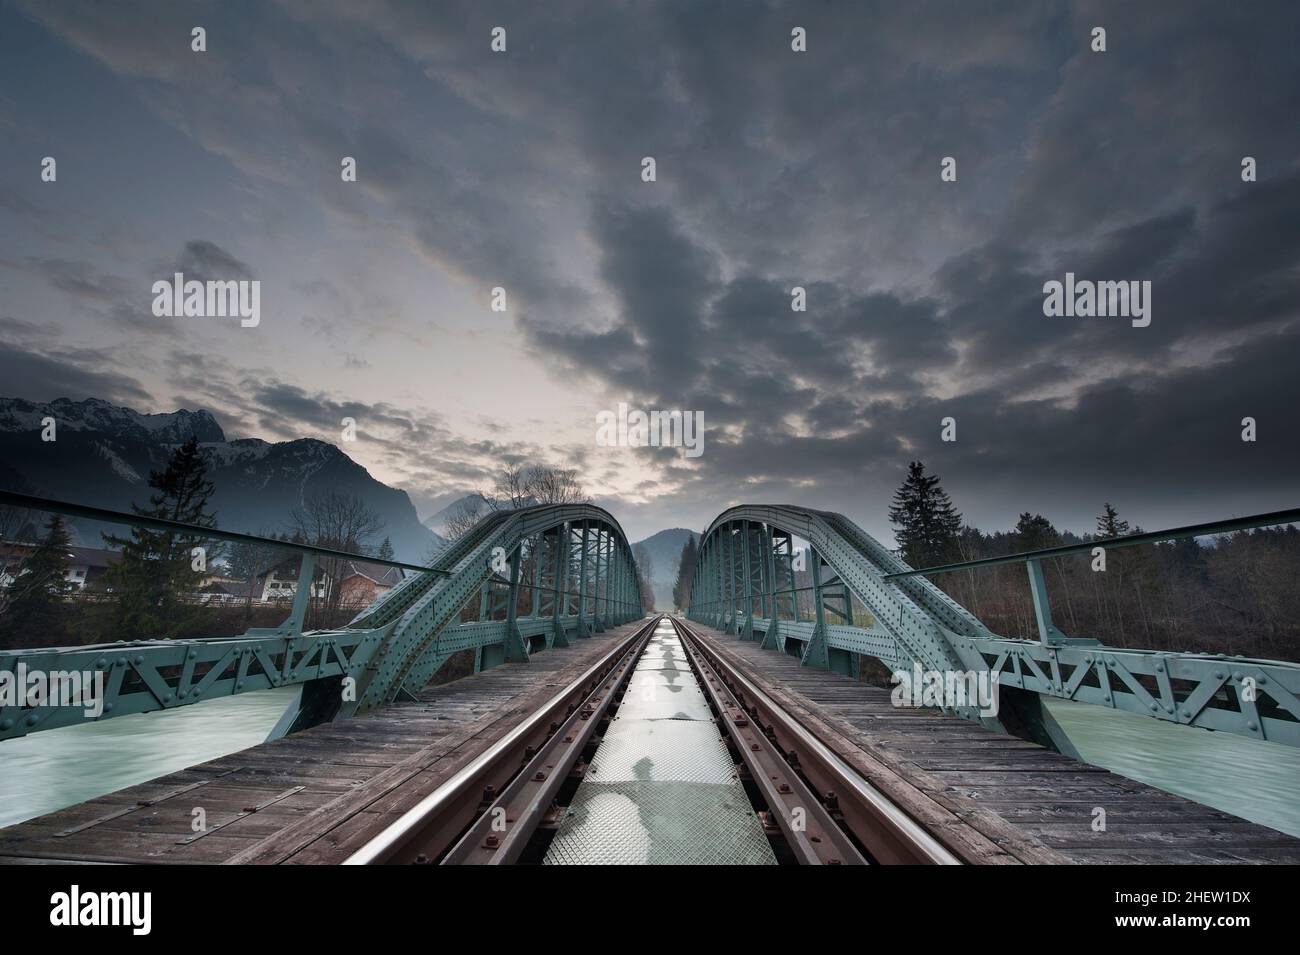 mystical train bridge made of steel and dramatic sky at sunset Stock Photo